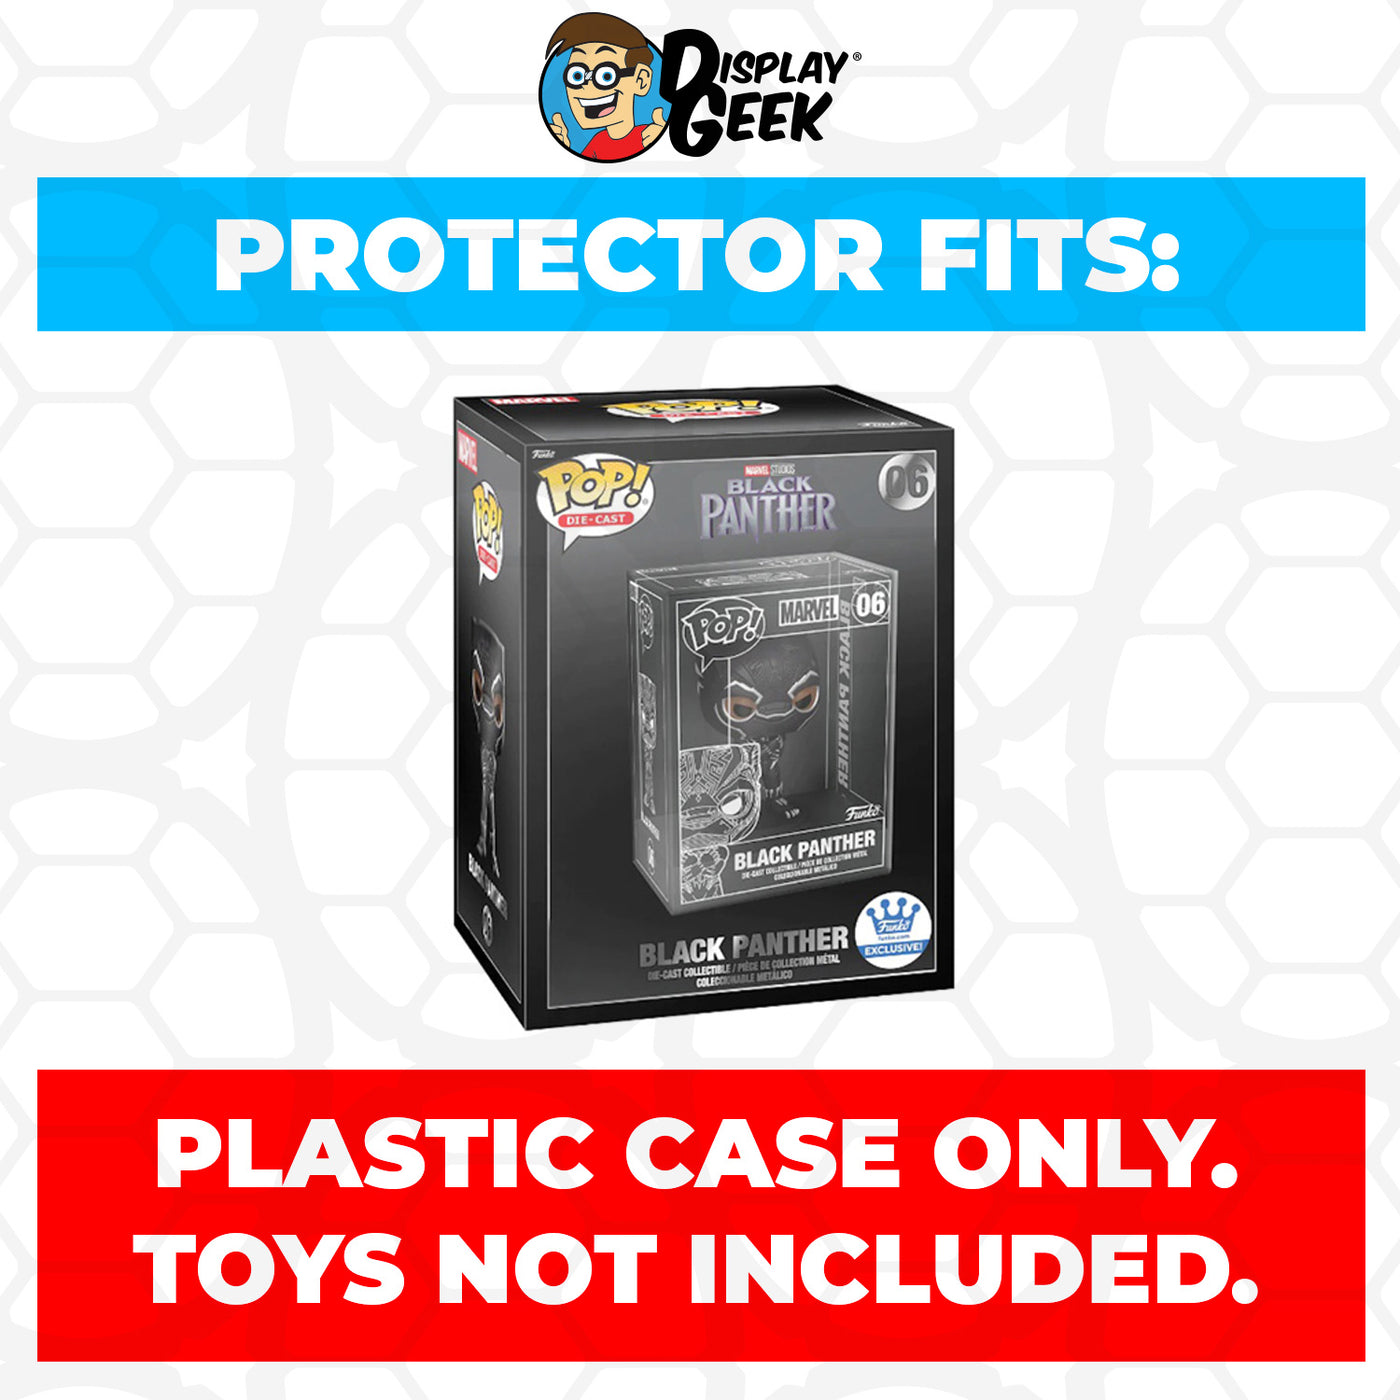 Pop Protector for Black Panther #06 Funko Pop Die-Cast Outer Box on The Protector Guide App by Display Geek